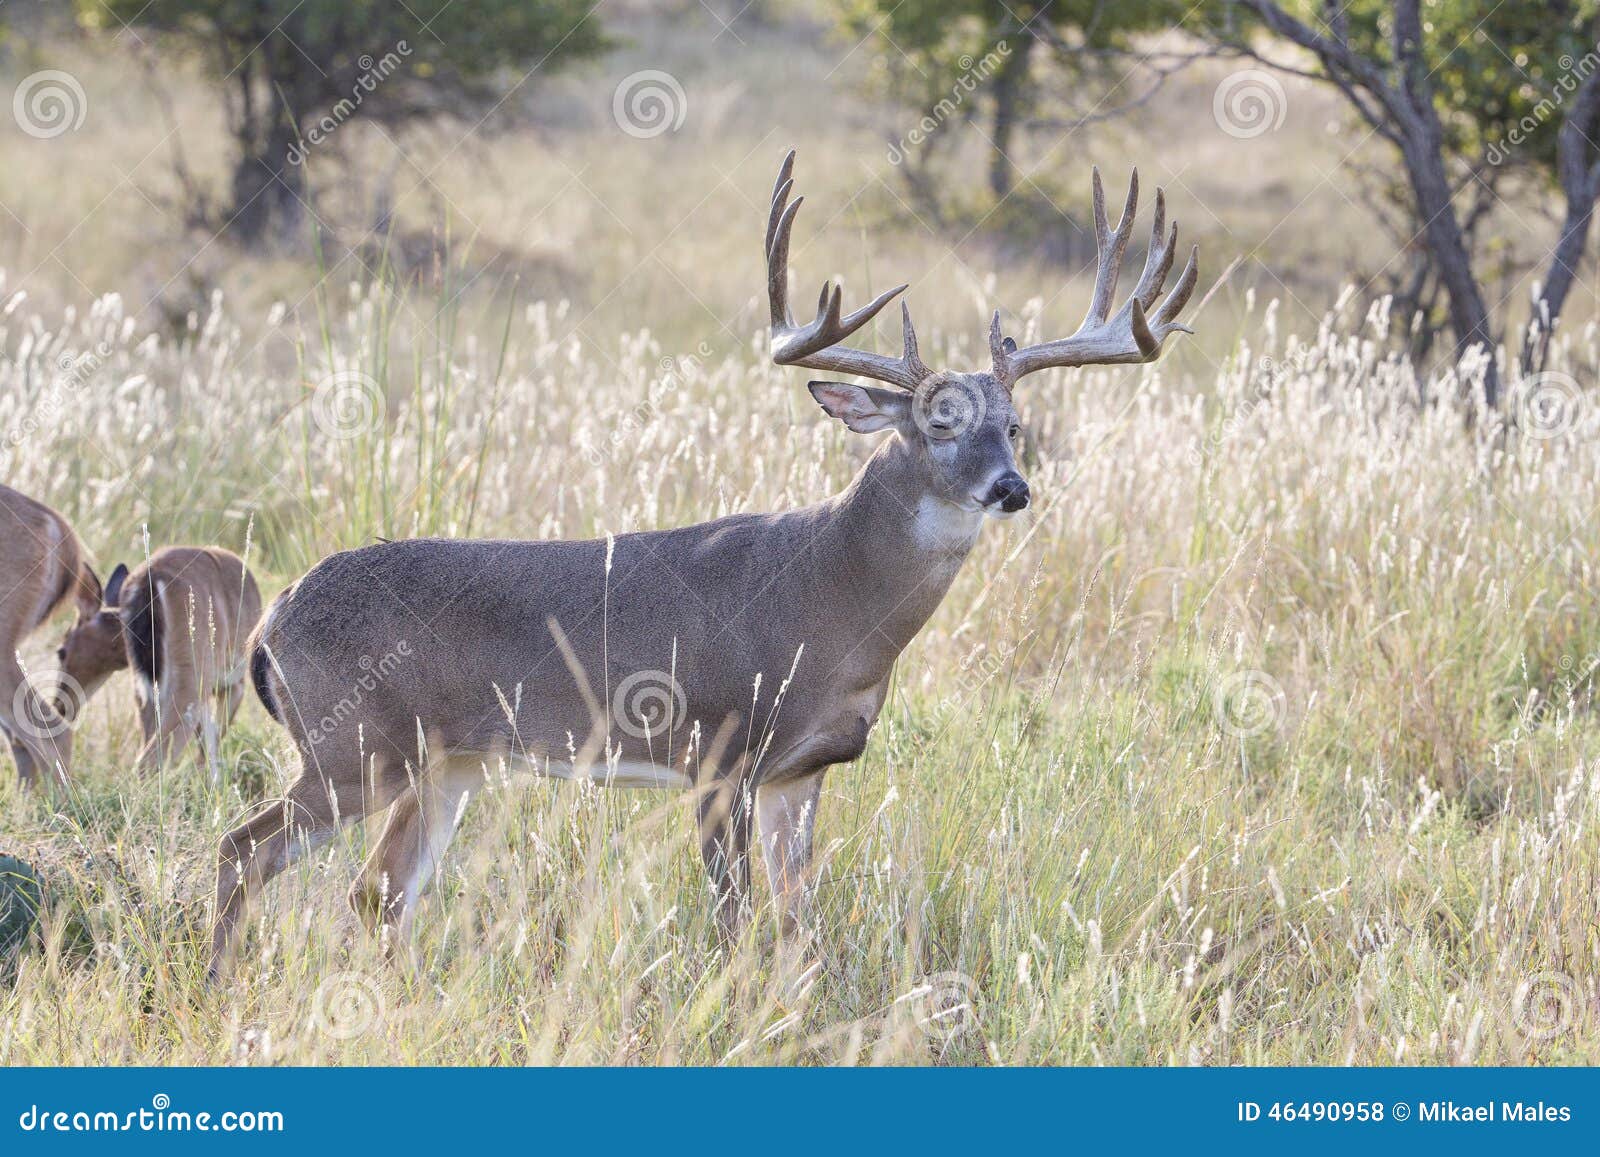 king of the forest whitetail buck